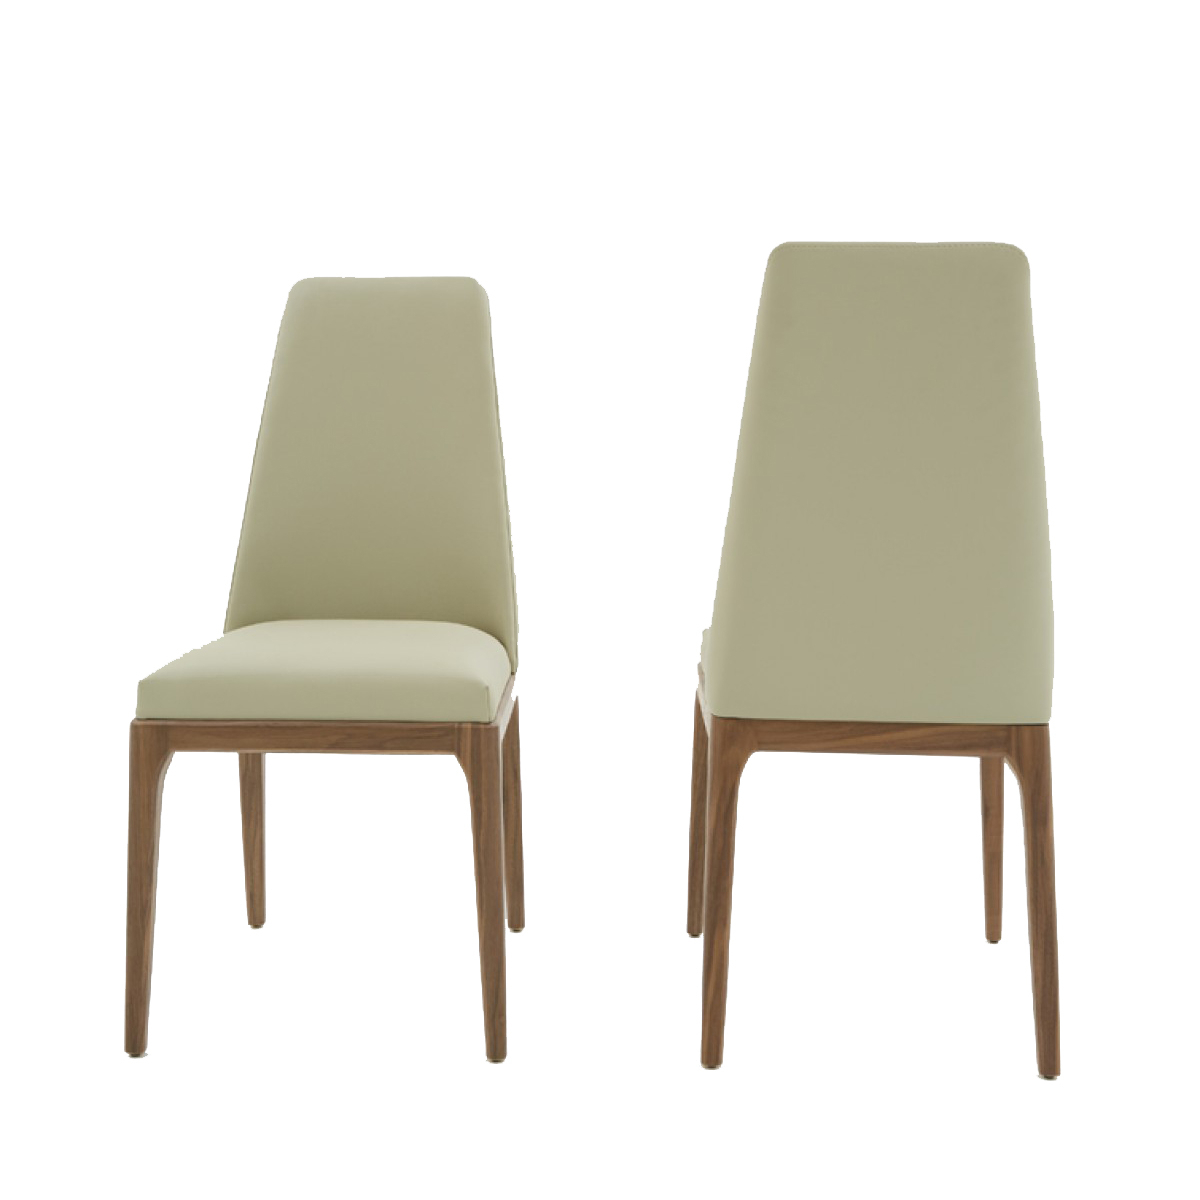 Leatherette Dining Chair With Wooden Straight Legs,Set Of 2,Brown And Gray- Saltoro Sherpi